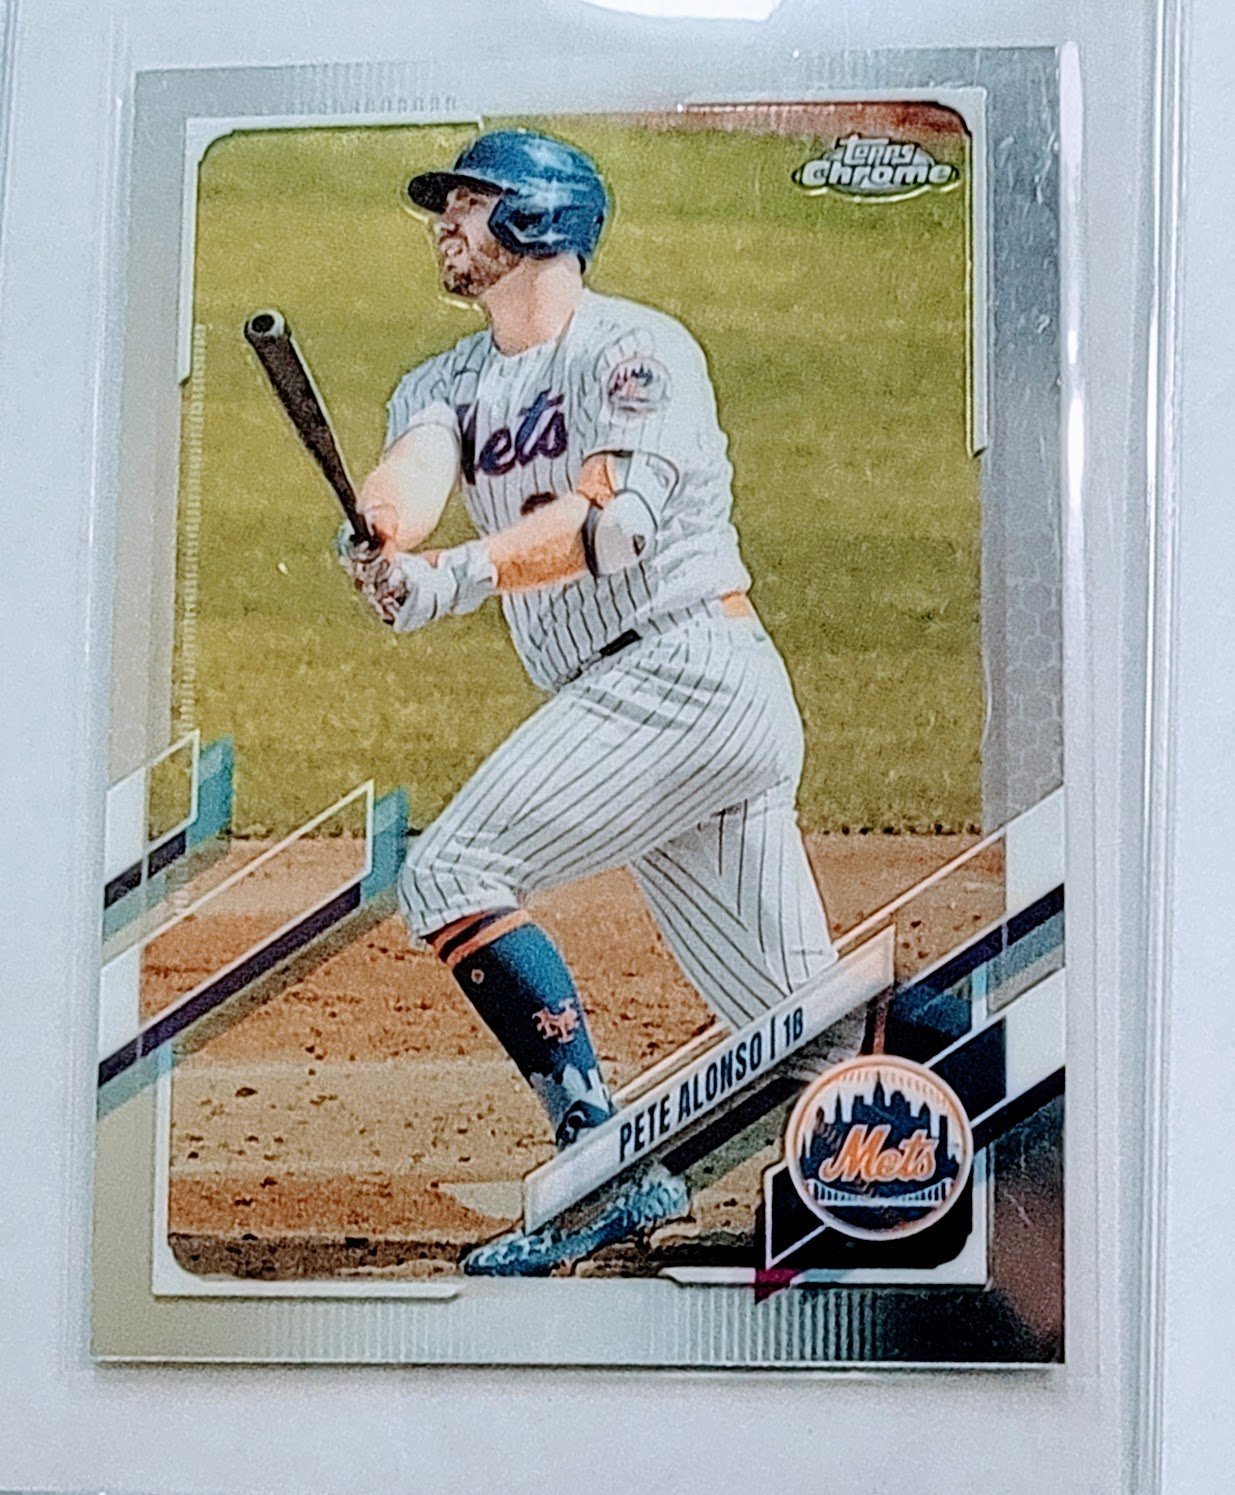 2021 Topps Chrome Pete Alonso Baseball Card TPTV simple Xclusive Collectibles   